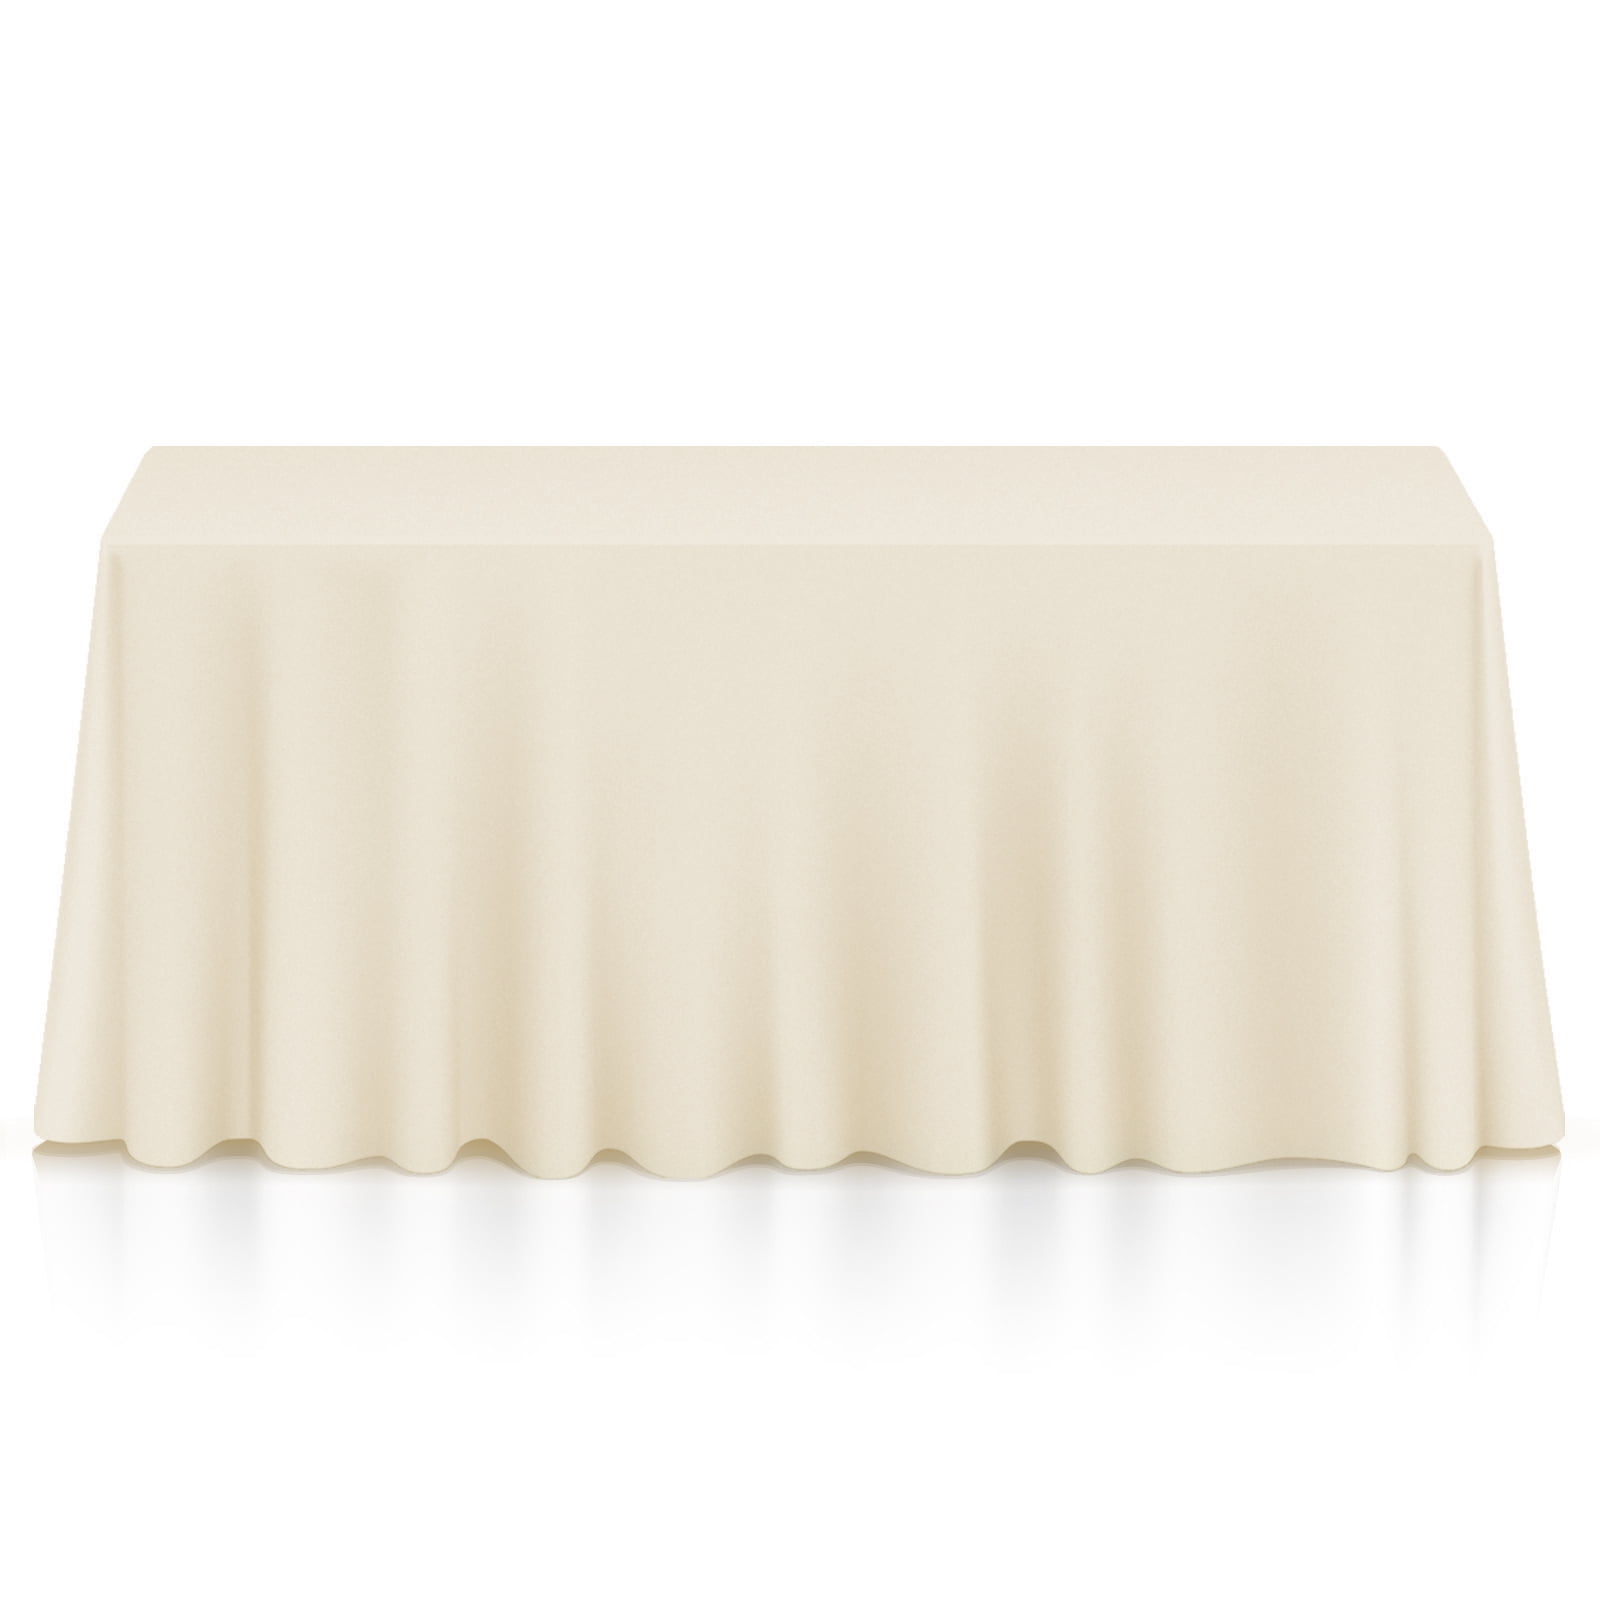 Lann's Linens Premium Weight Polyester Tablecloth for Wedding Restaurant or for sale online 